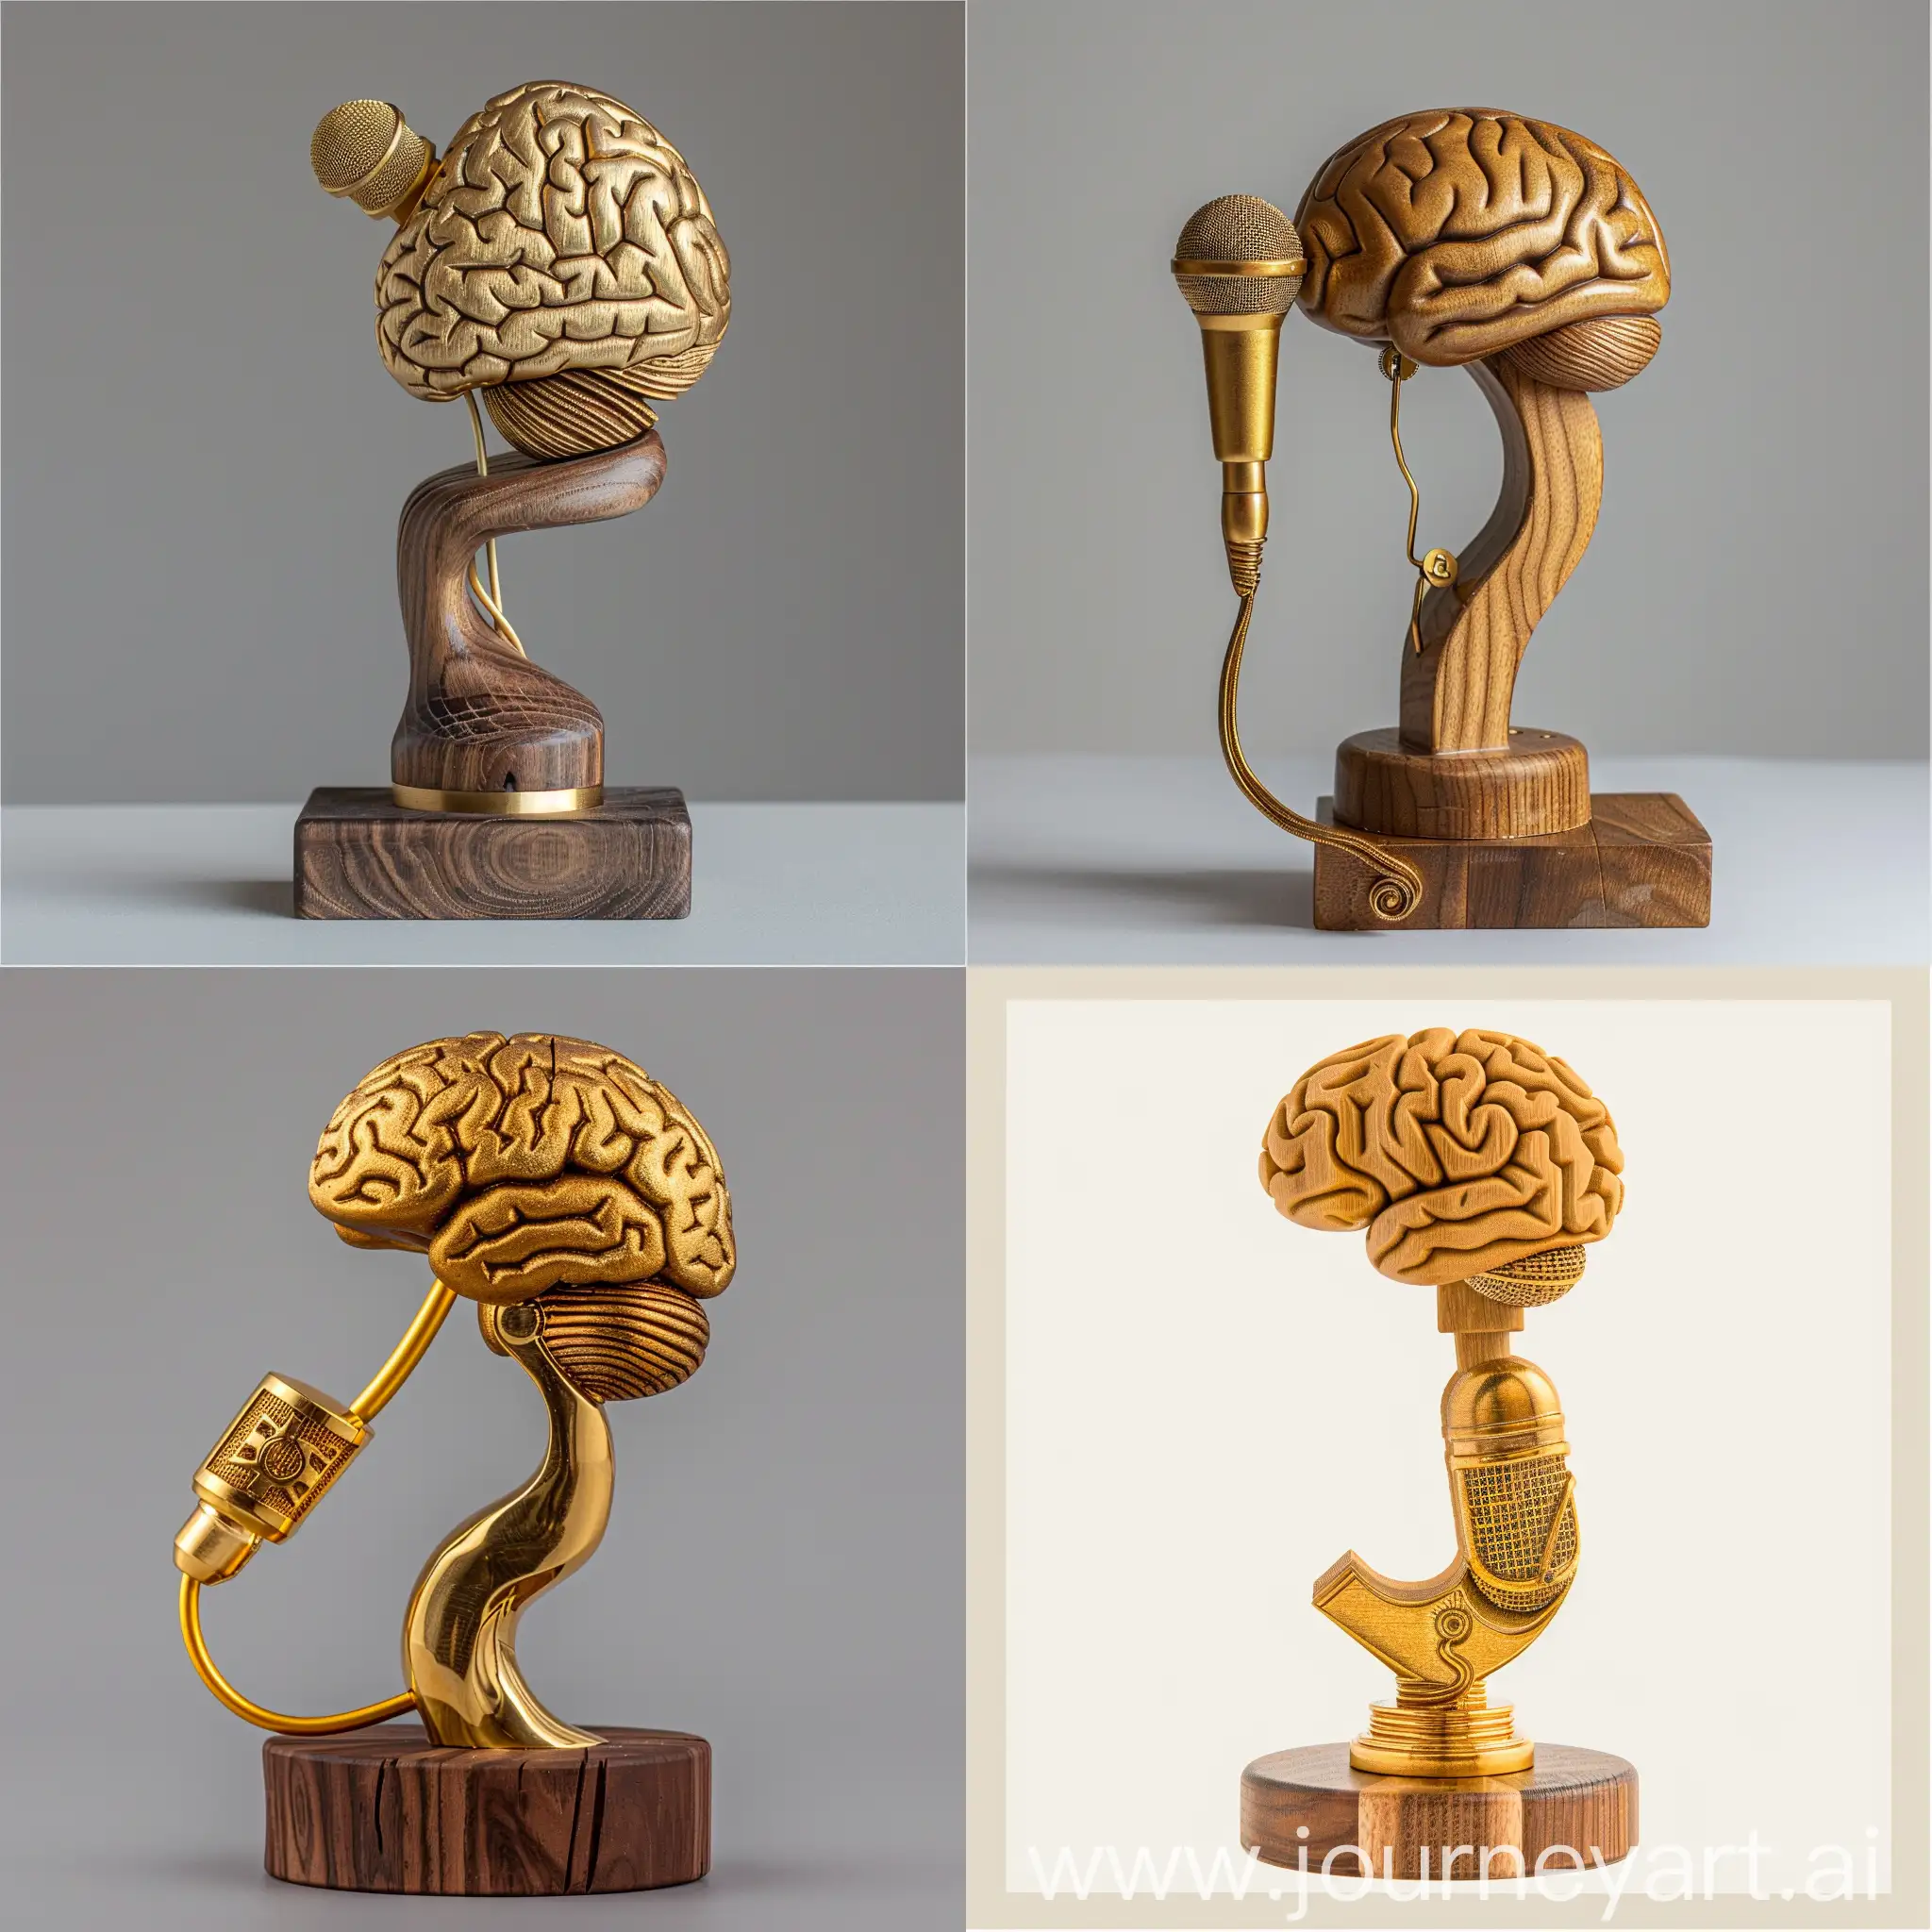 Golden-Wooden-Science-Slam-Award-with-Brain-Mandala-and-Microphone